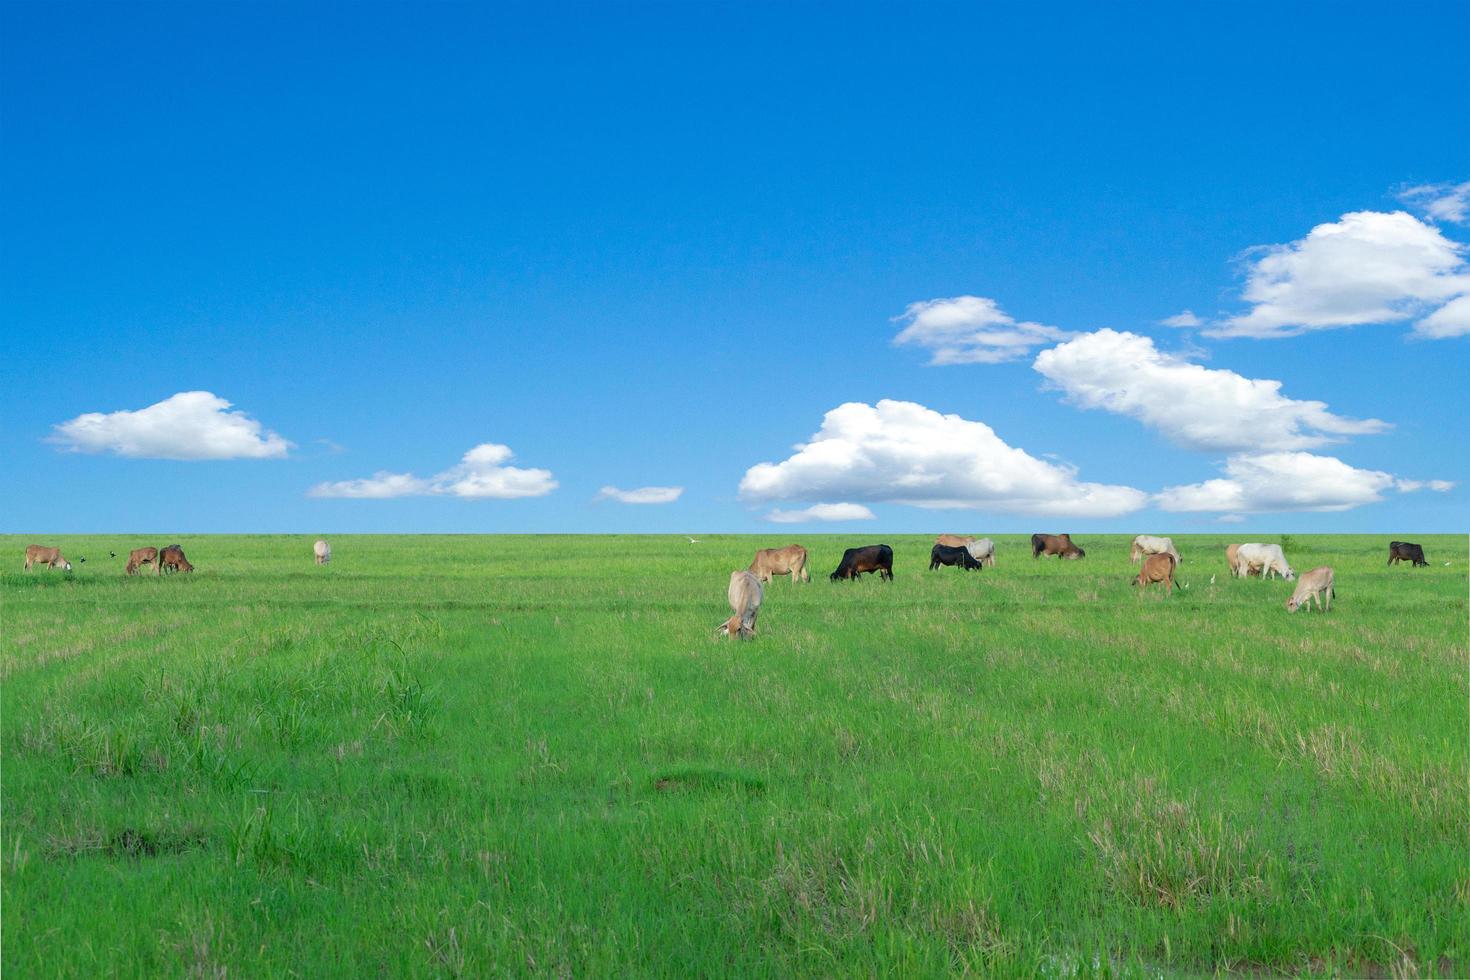 Group of cows eat the grass in the large field photo